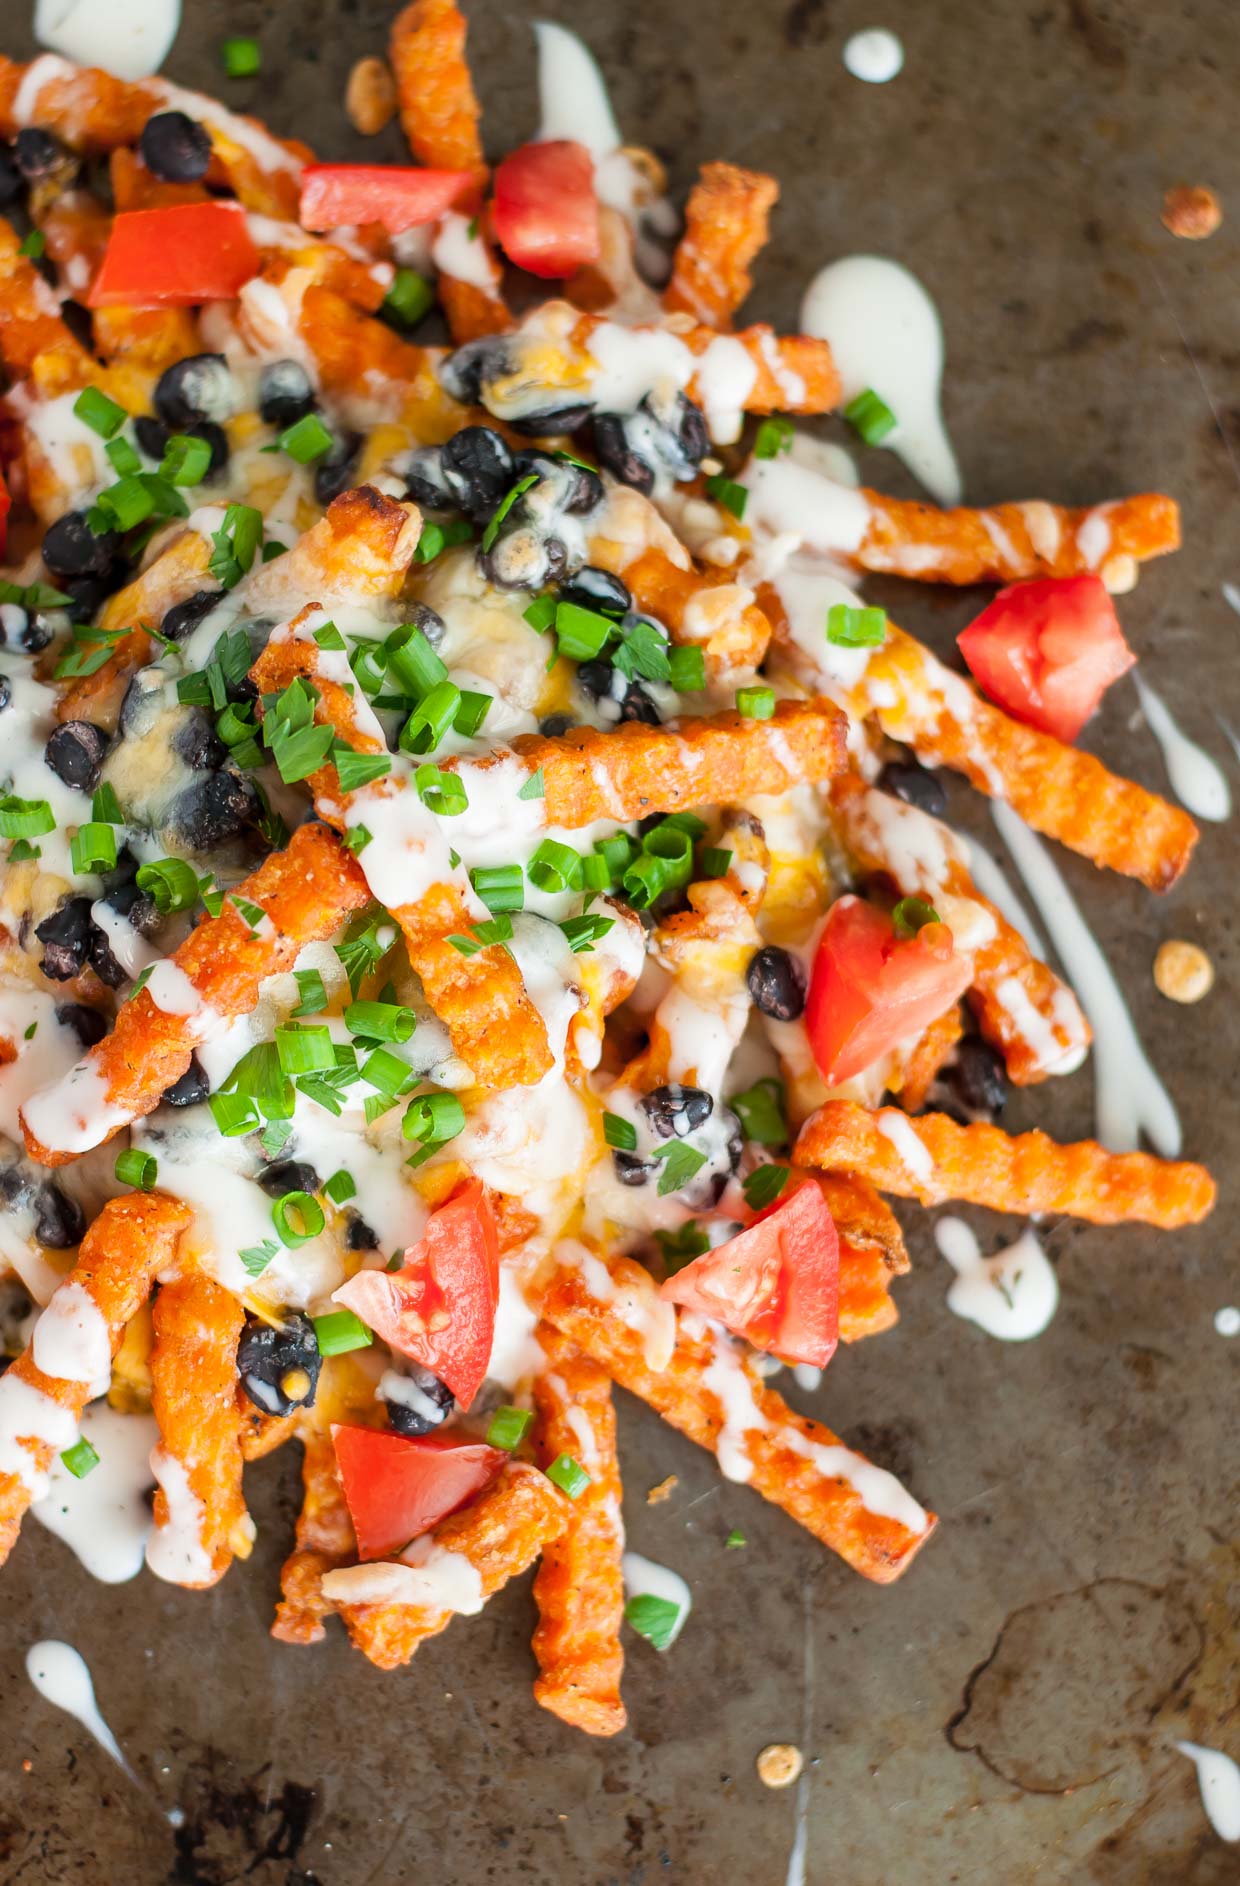 Whenever I have a lone bag of french fries in my freezer I bake them up and make Loaded Mexican Sweet Potato Cheese Fries - like nachos, only better!